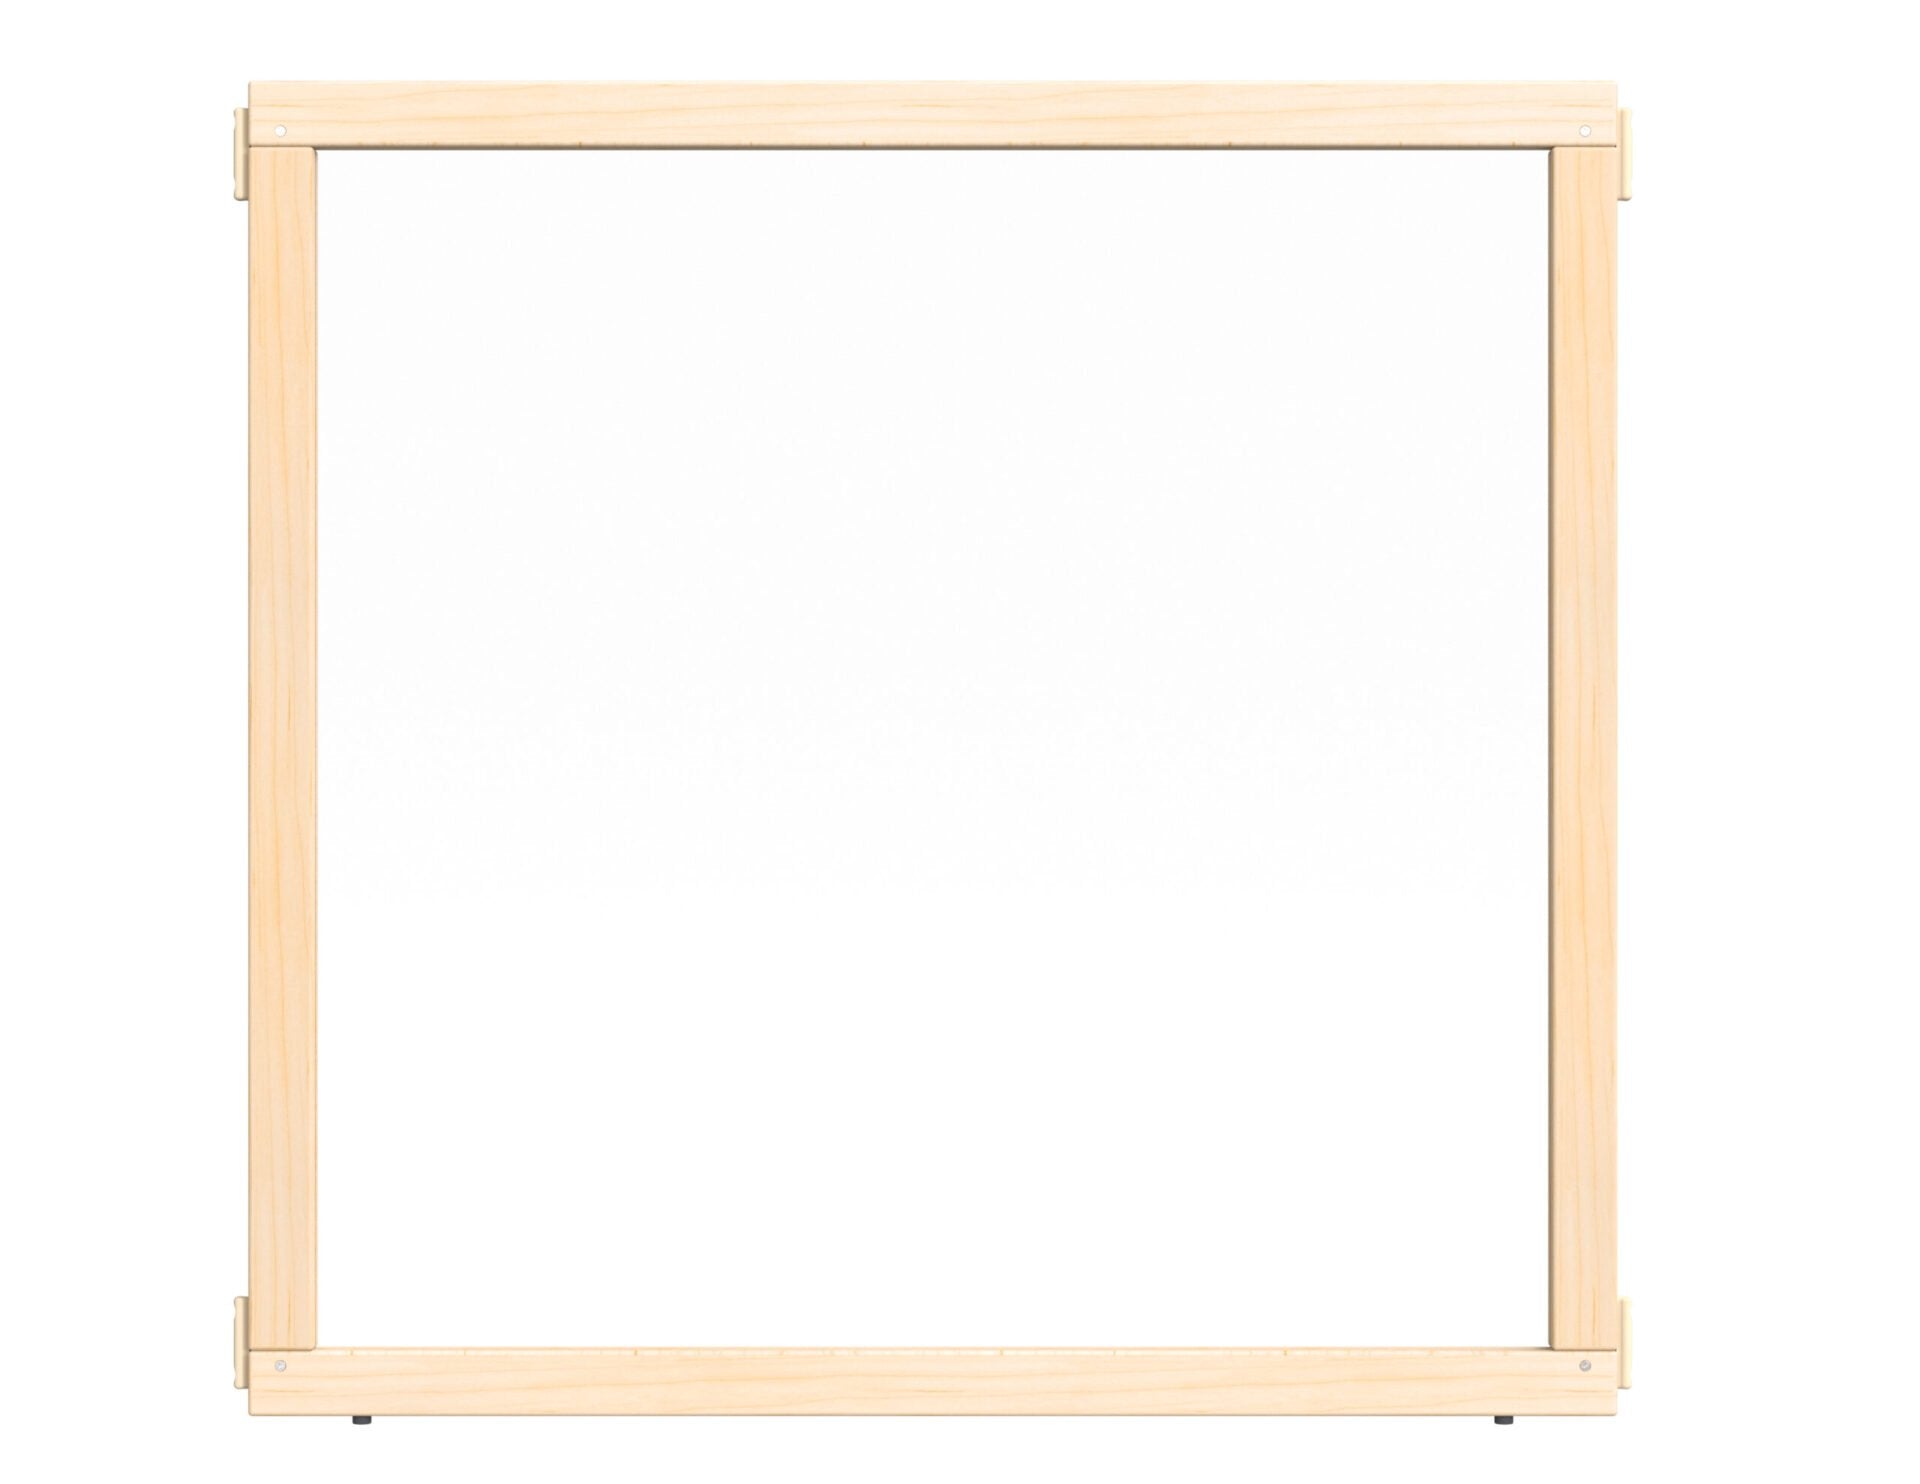 KYDZ SuiteÂ® Panel - A-height - 36